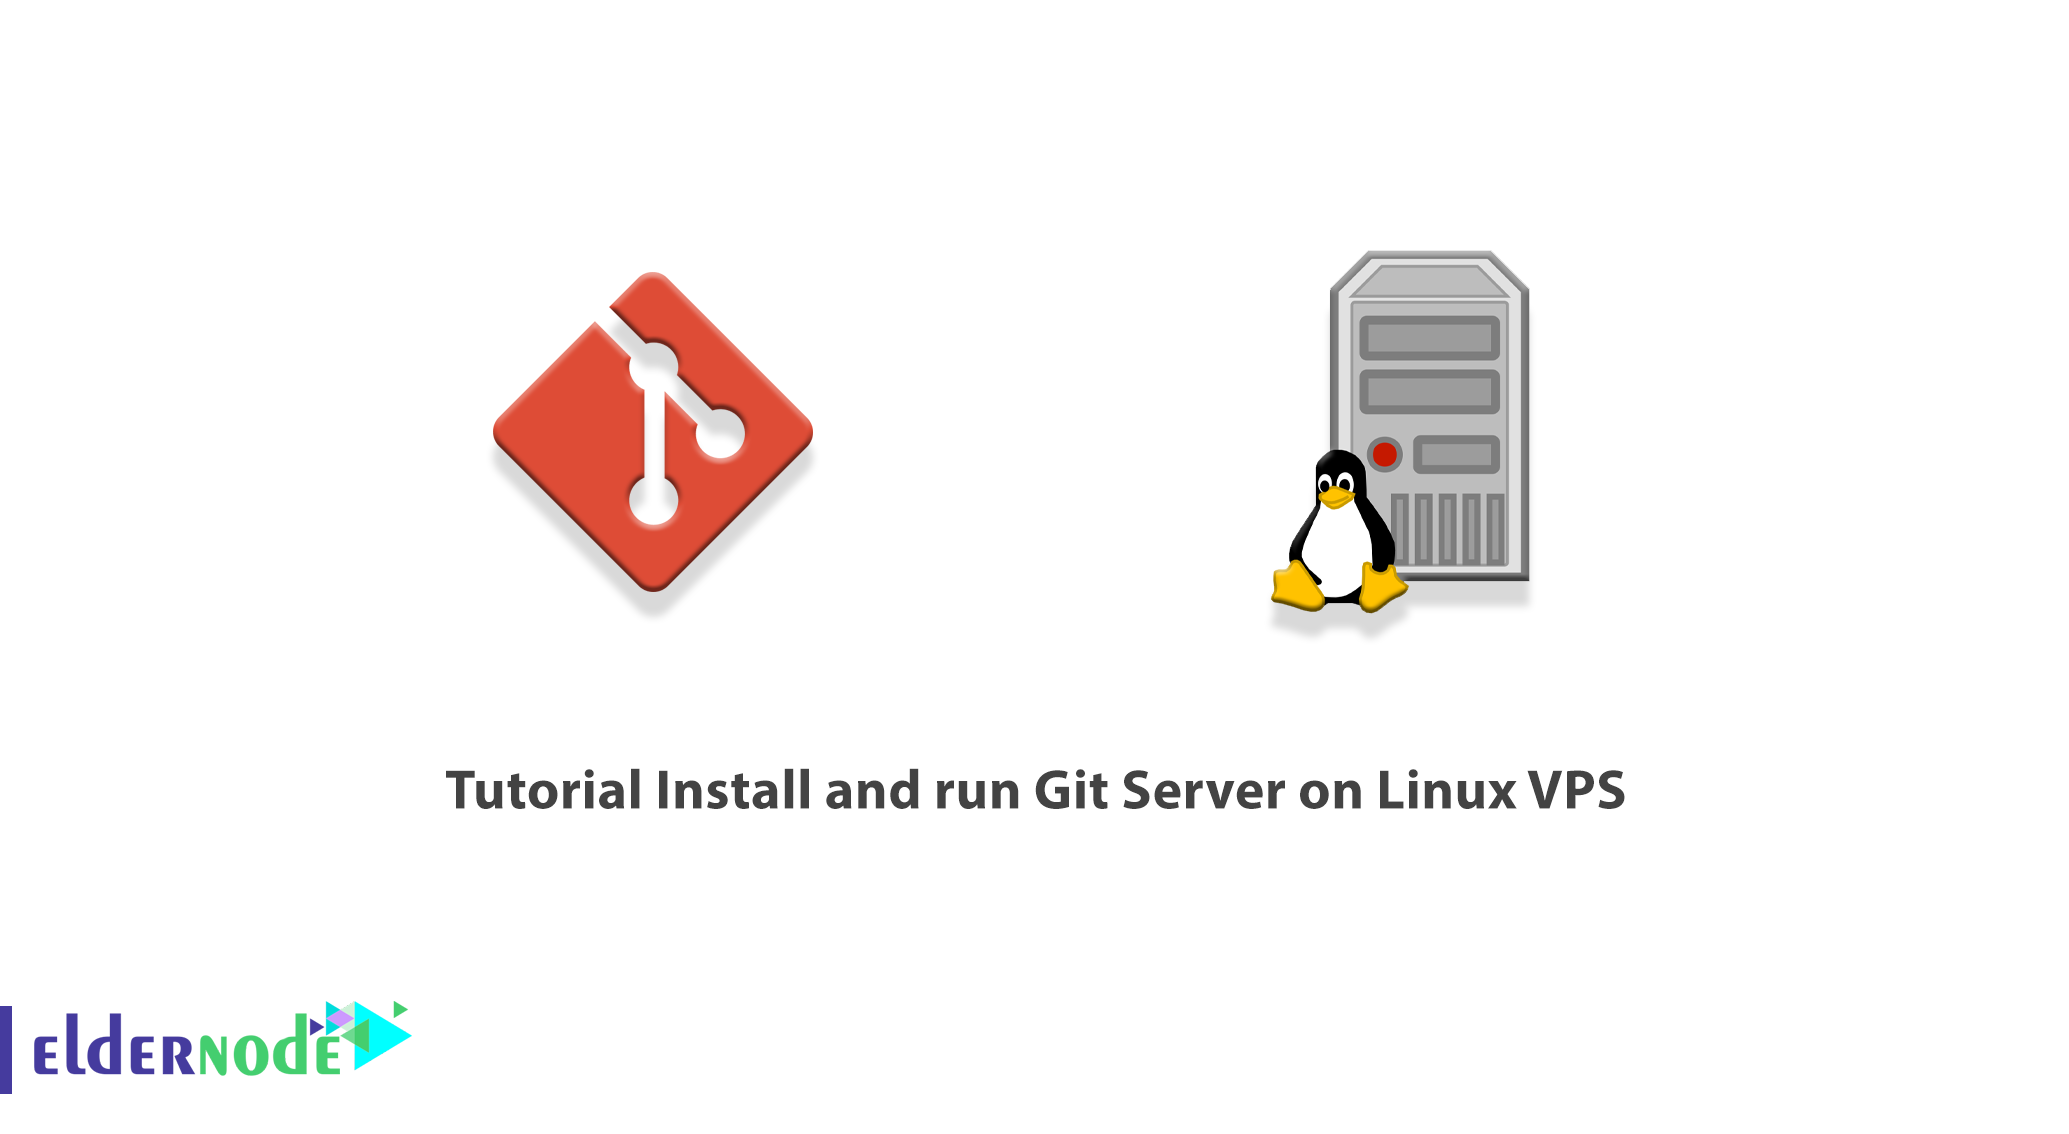 Tutorial Install and run Git Server on Linux VPS